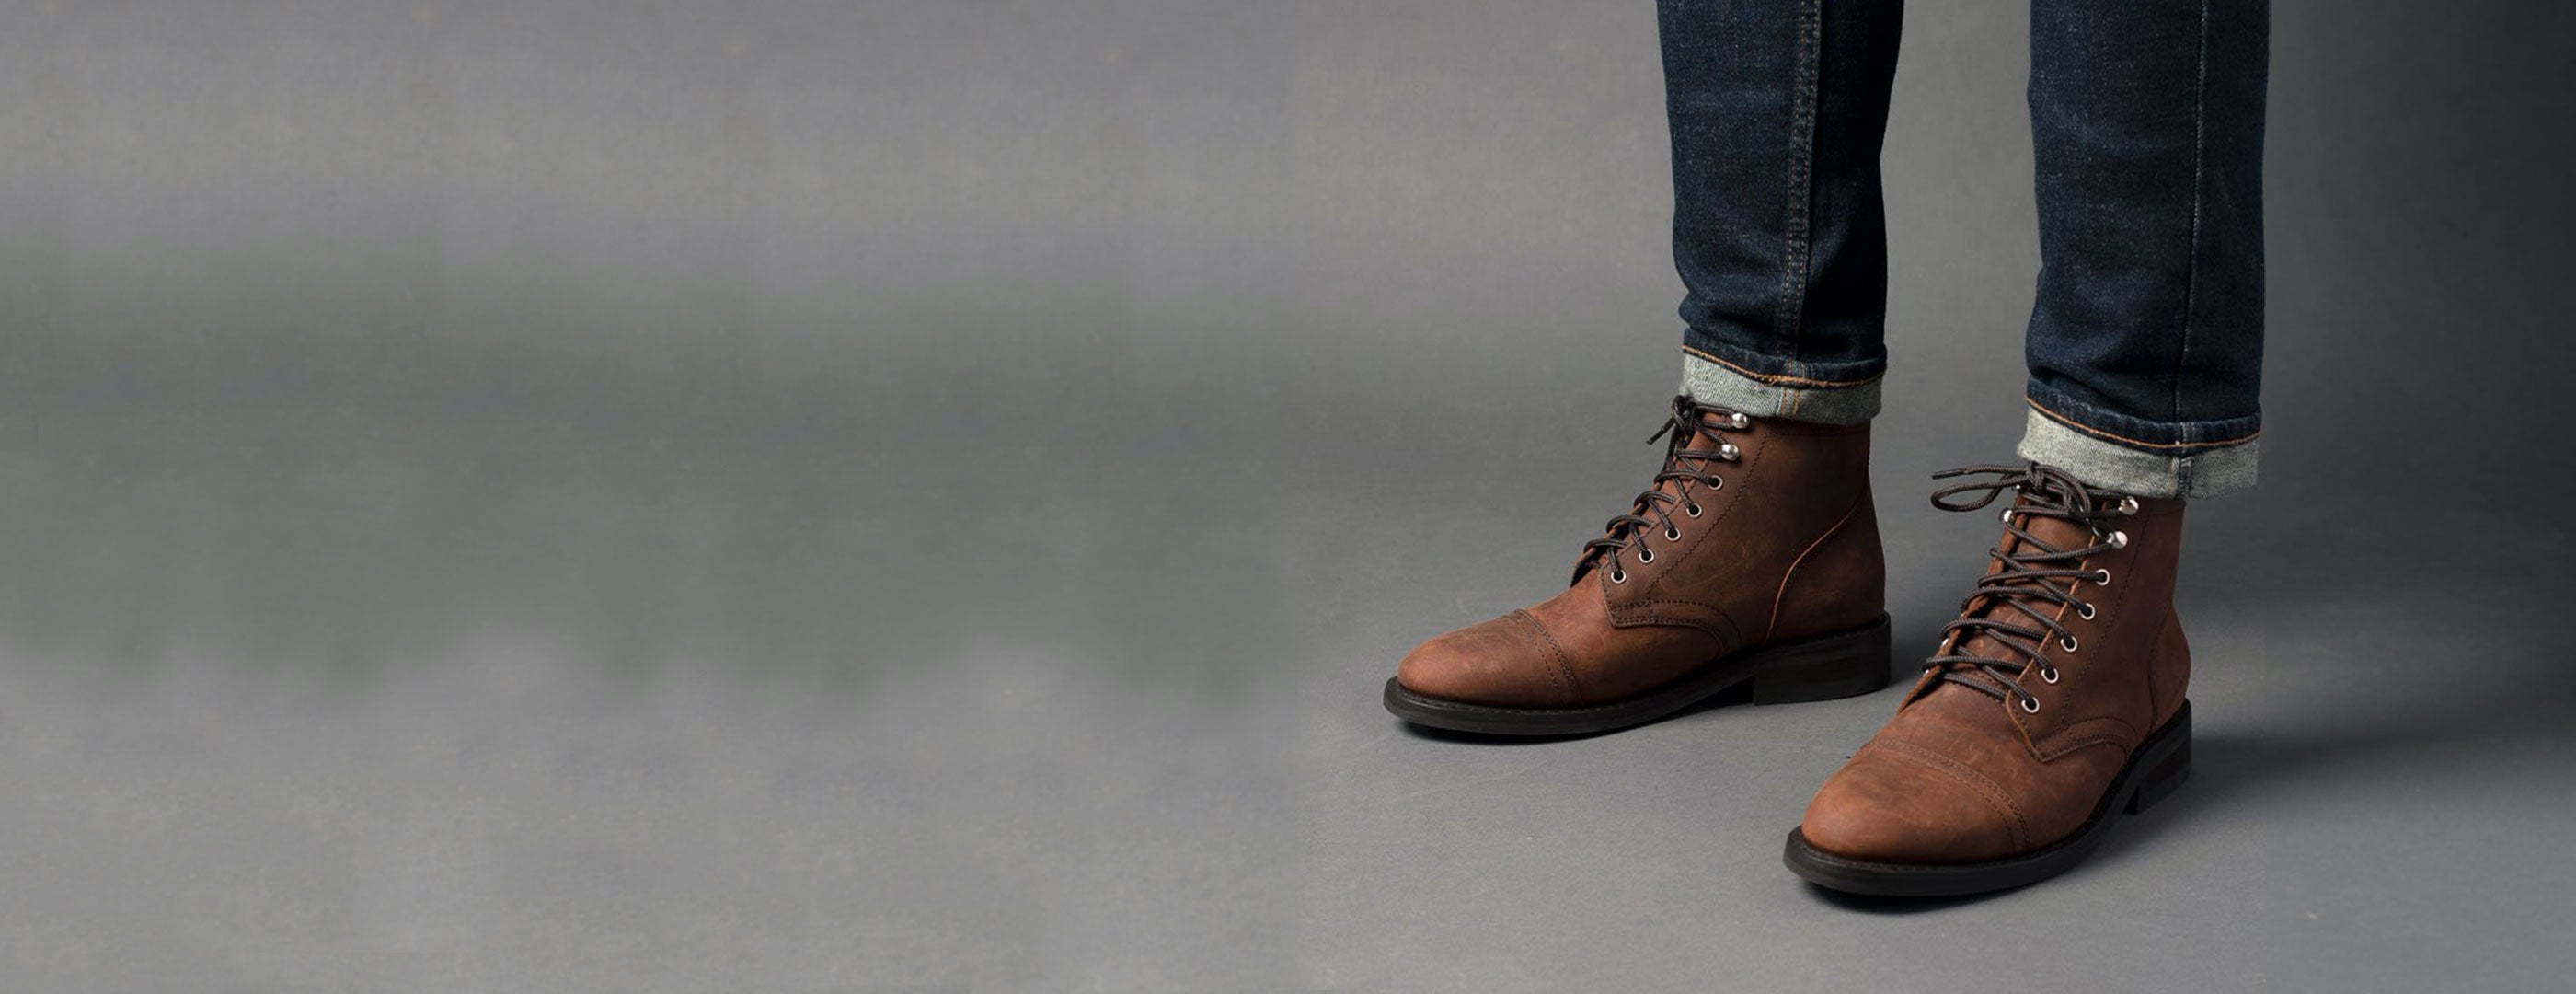 “The Surprisingly Affordable Boots That Get Better When You Beat ‘Em Up”